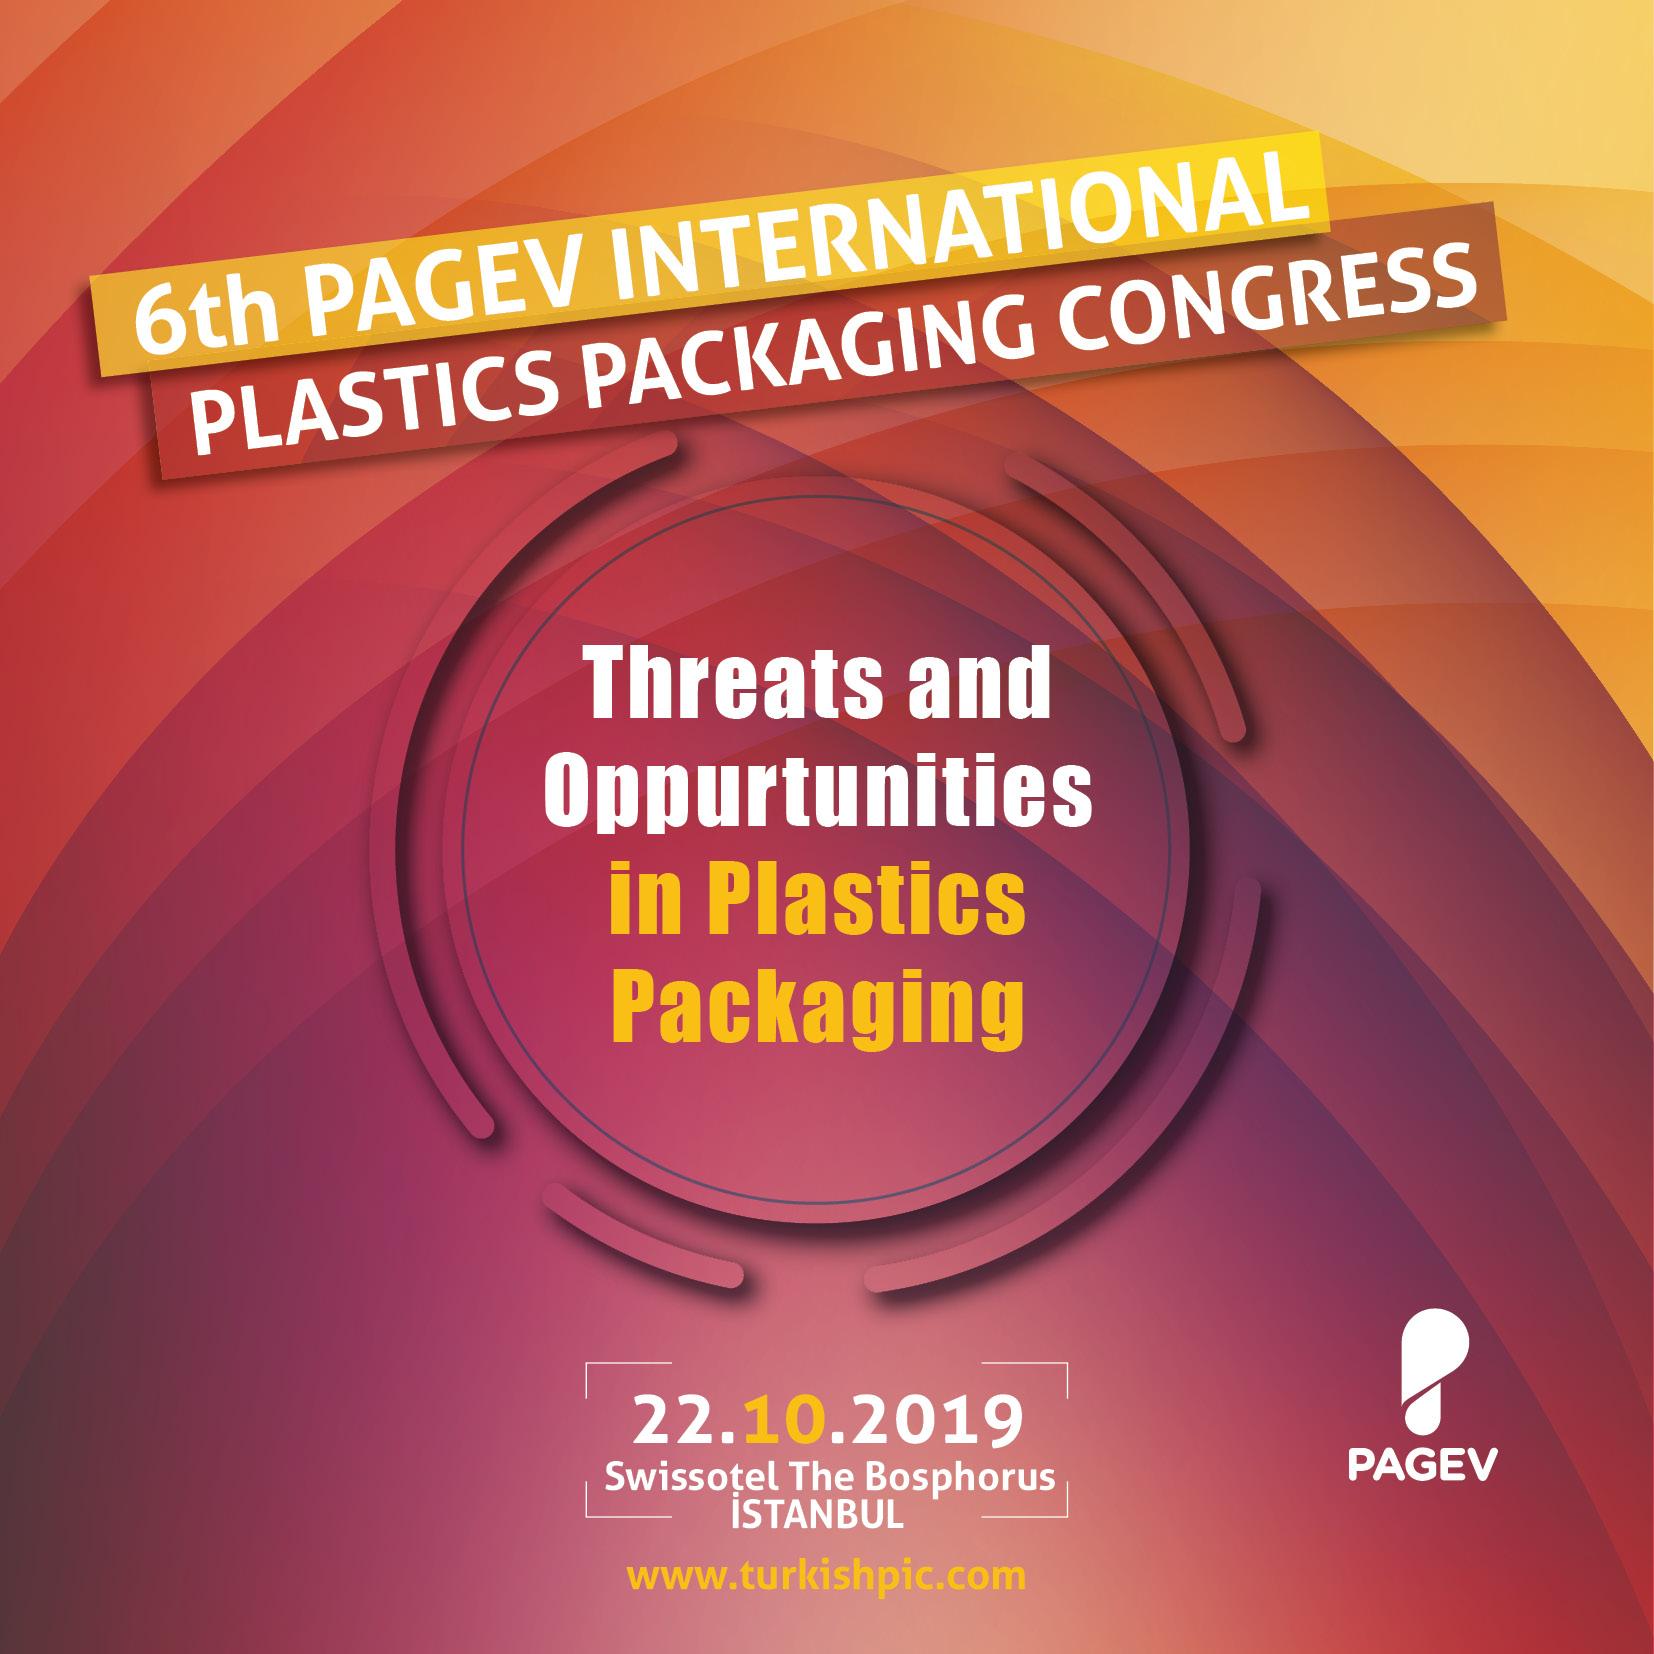 Opportunities in recycling and smart packaging